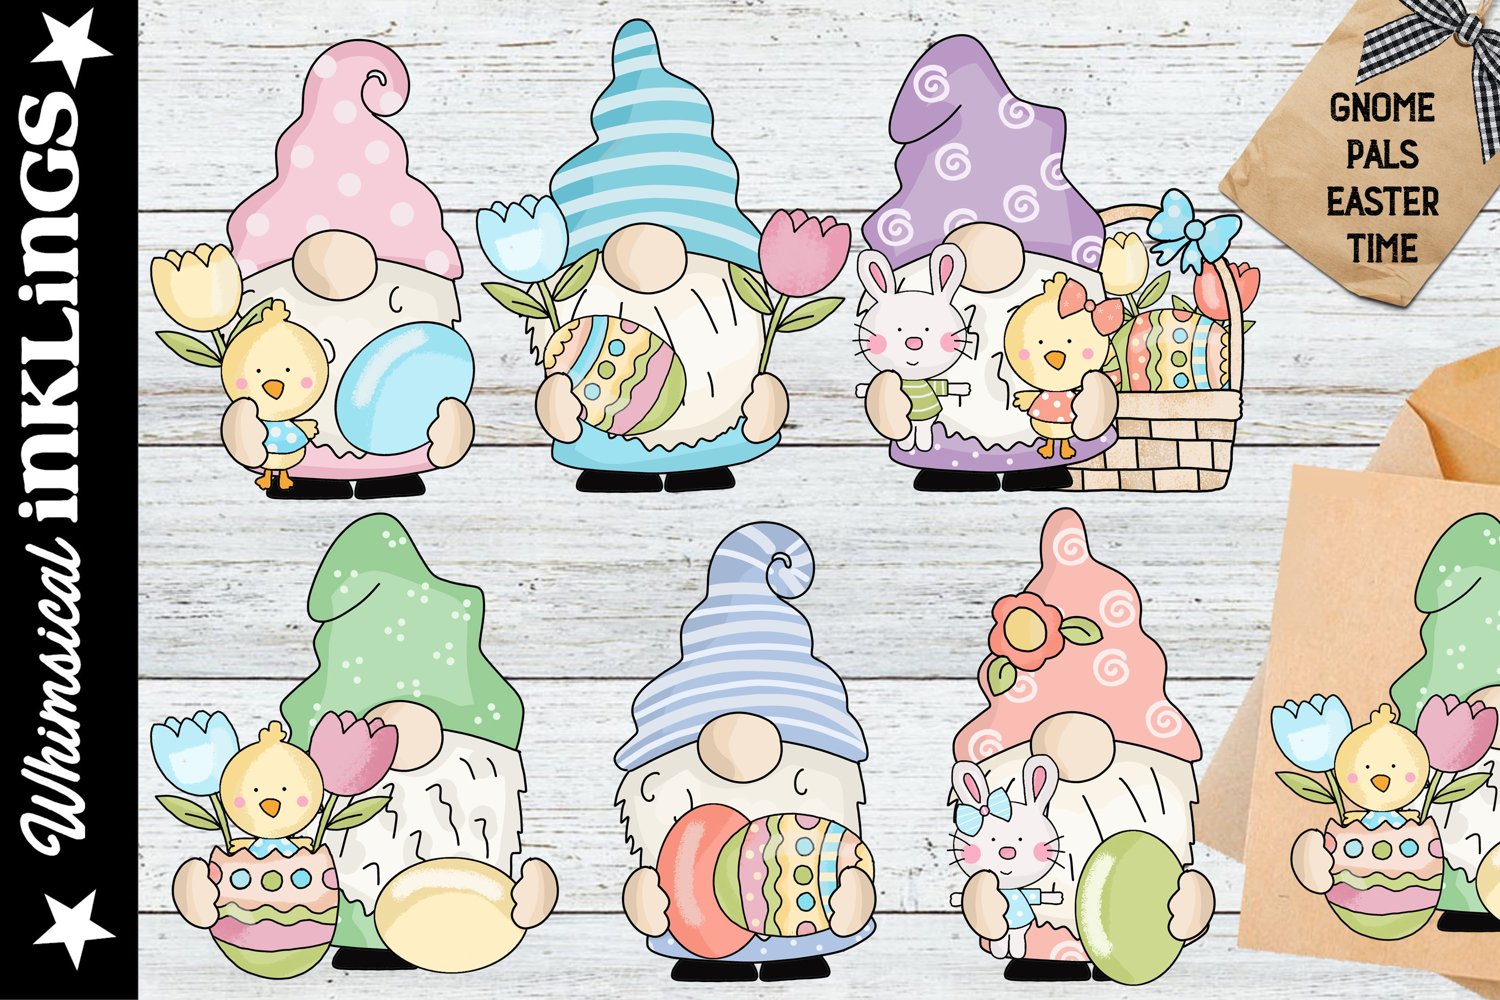 Gnome pals for Easter.